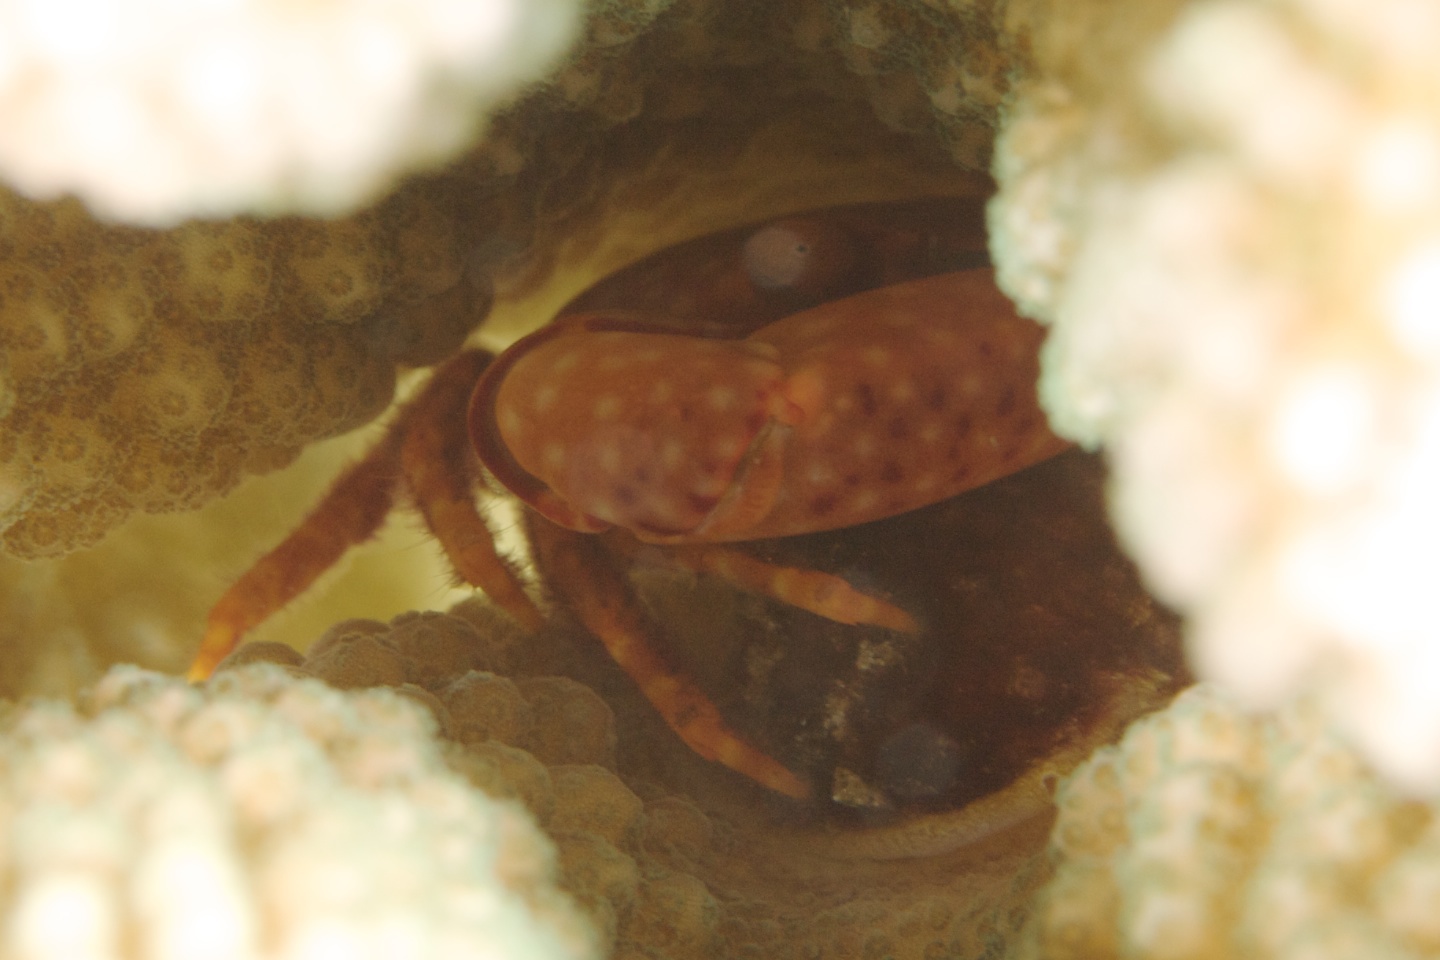 Yellow-spotted guard crab